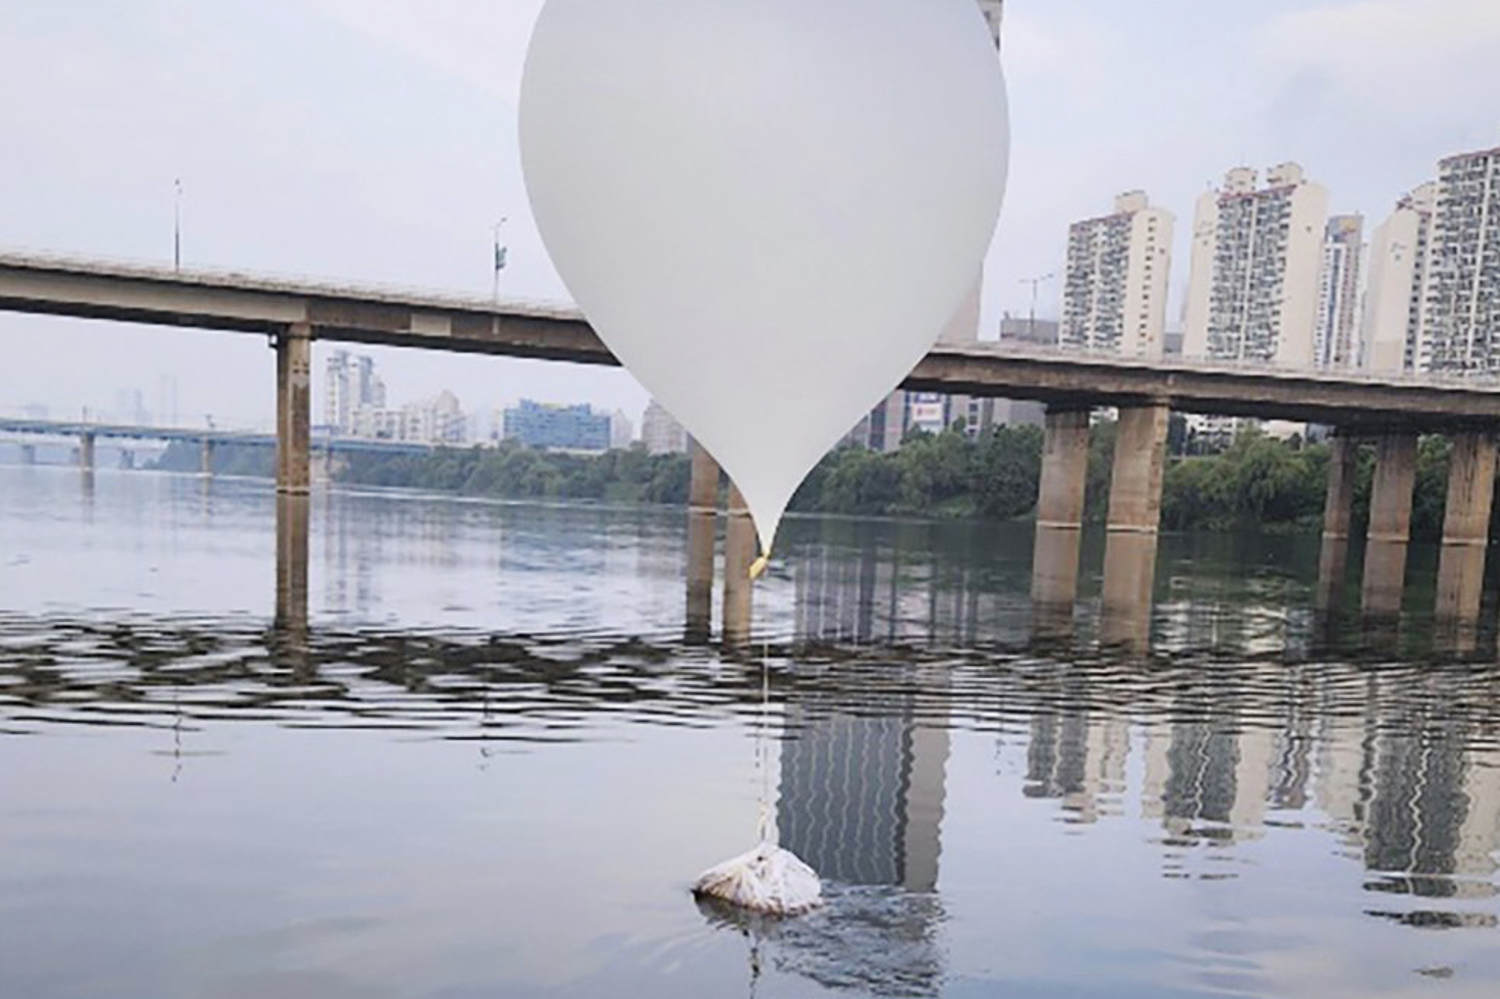 South Korea responds to North’s trash balloons with loudspeaker broadcasts